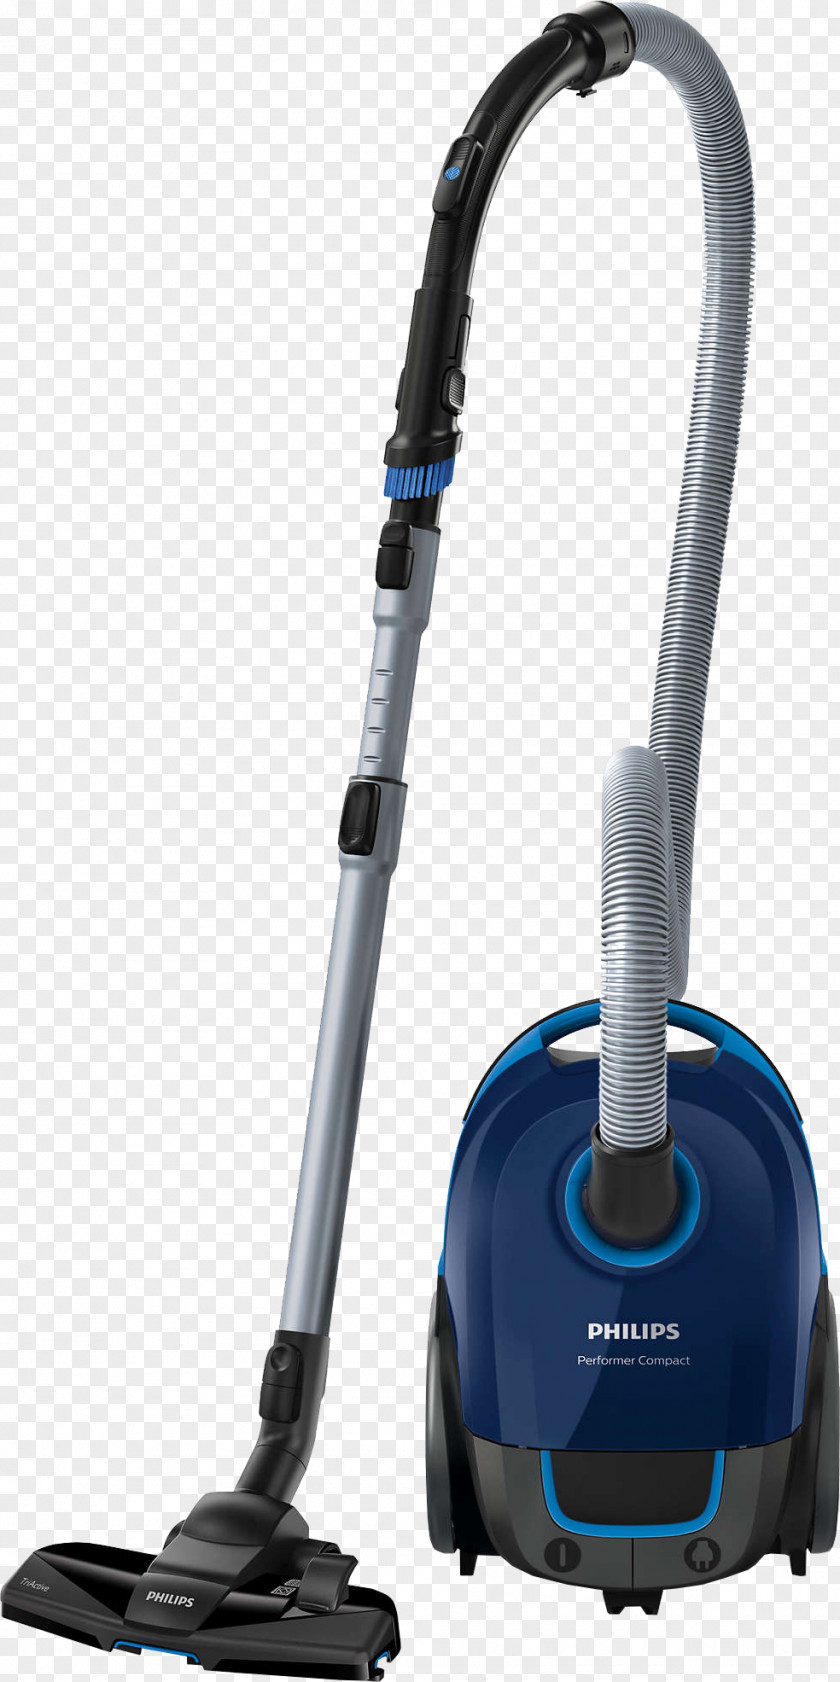 Vacuum Cleaner Philips Performer Compact PowerLife FC8322 Home Appliance PNG